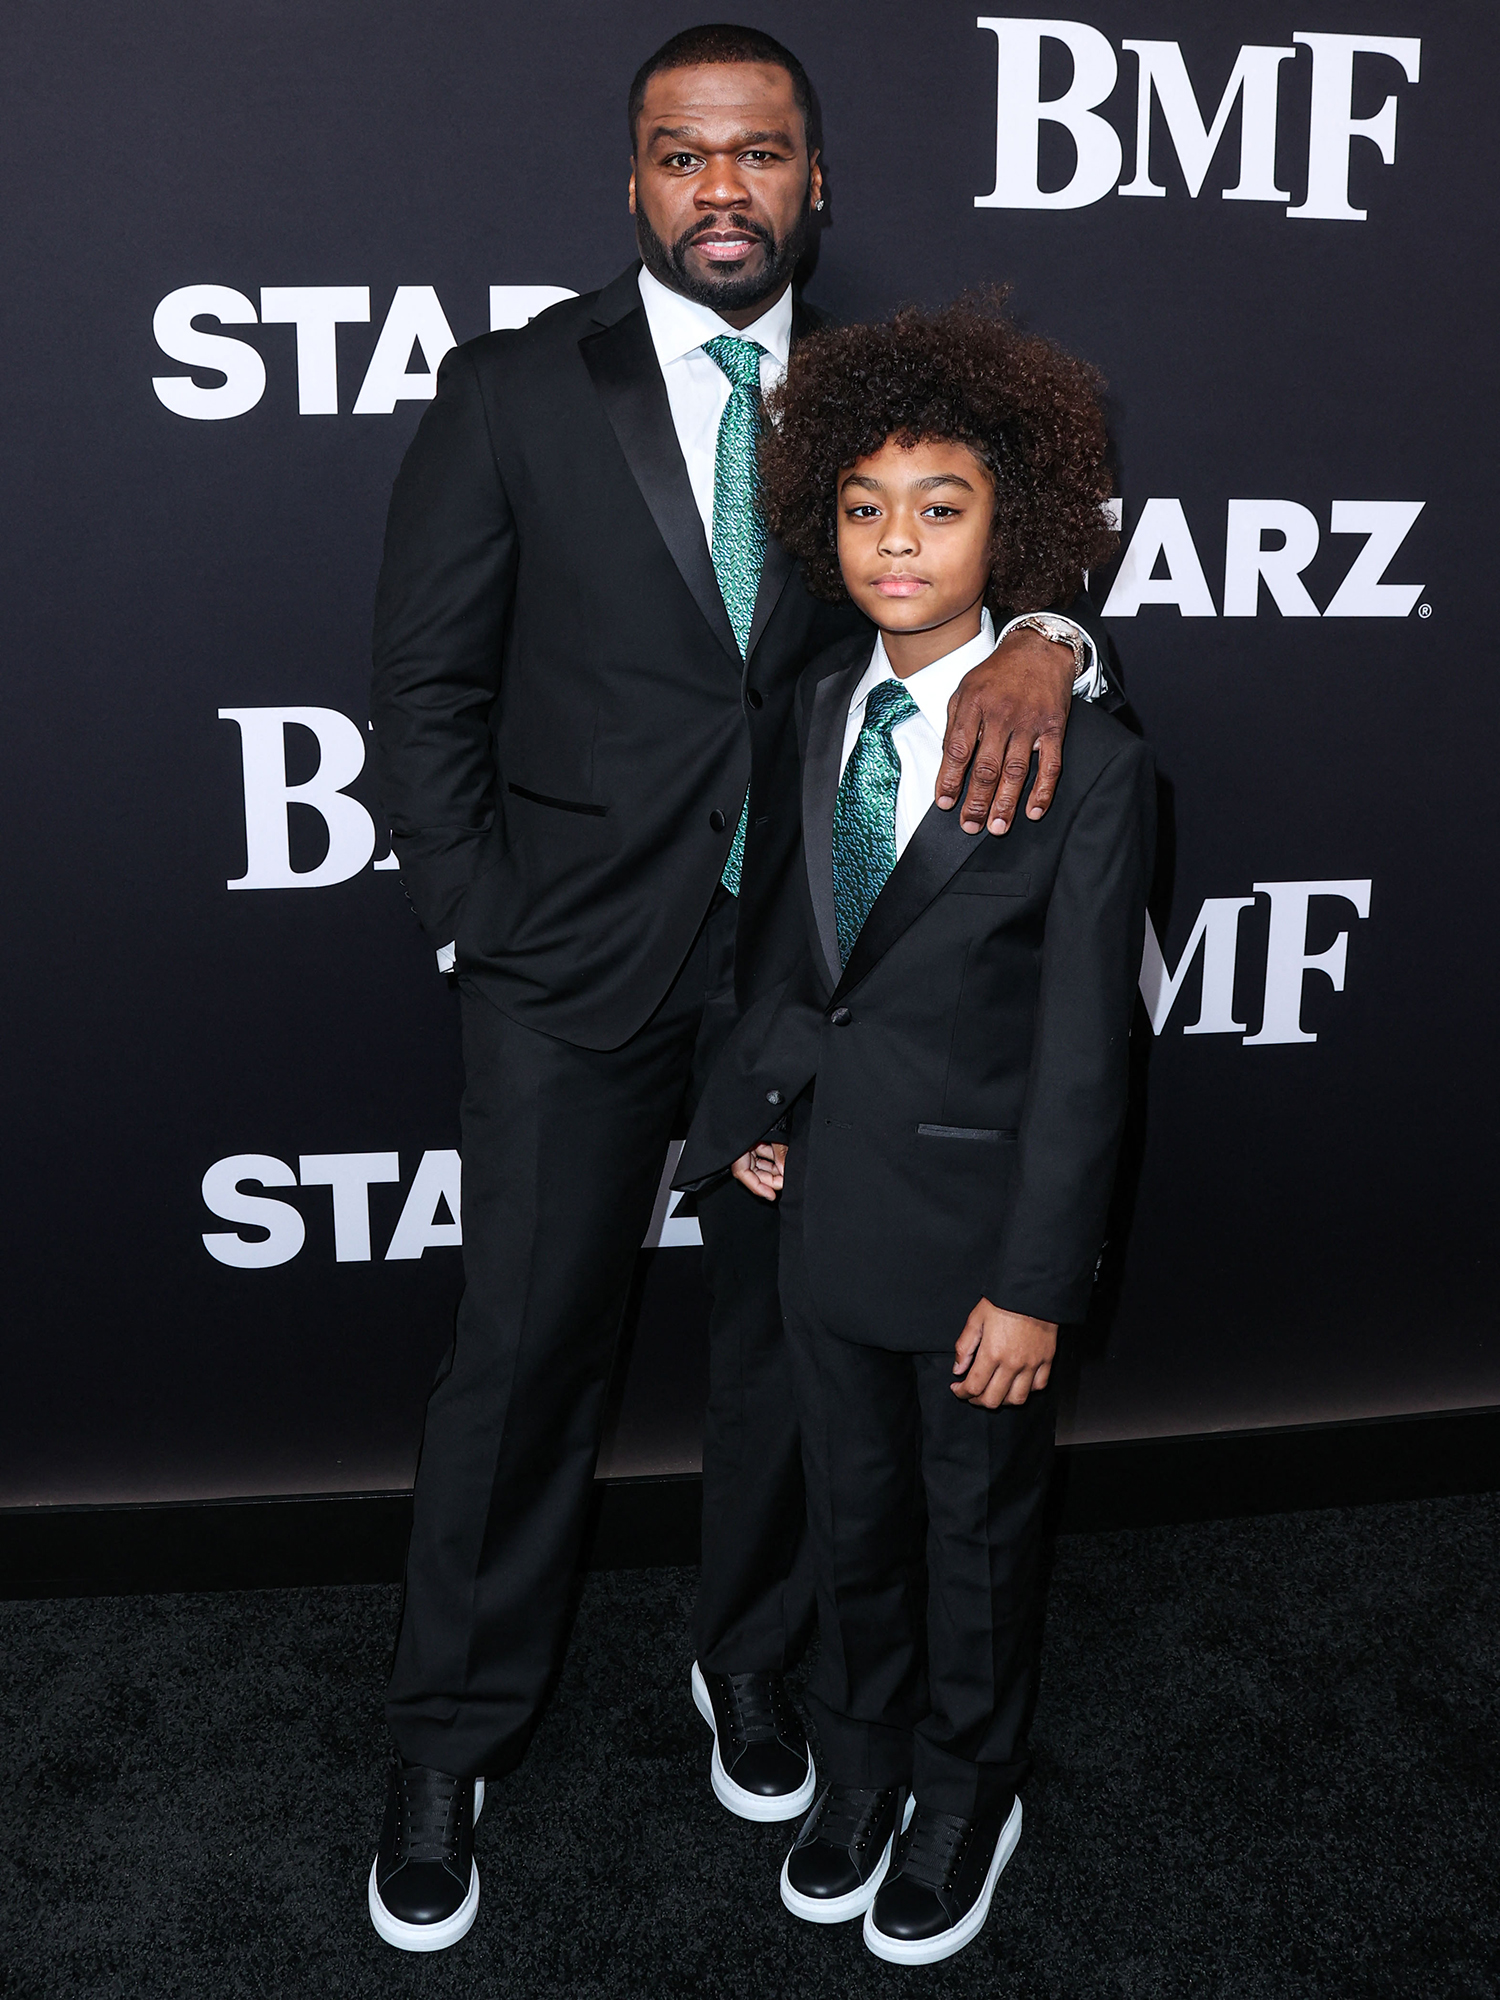 https://www.usmagazine.com/wp-content/uploads/2023/01/see-all-the-celebrity-parents-who-have-had-twinning-style-moments-with-their-kids-50-Cent-and-Sire-Jackson.jpg?quality=86&strip=all